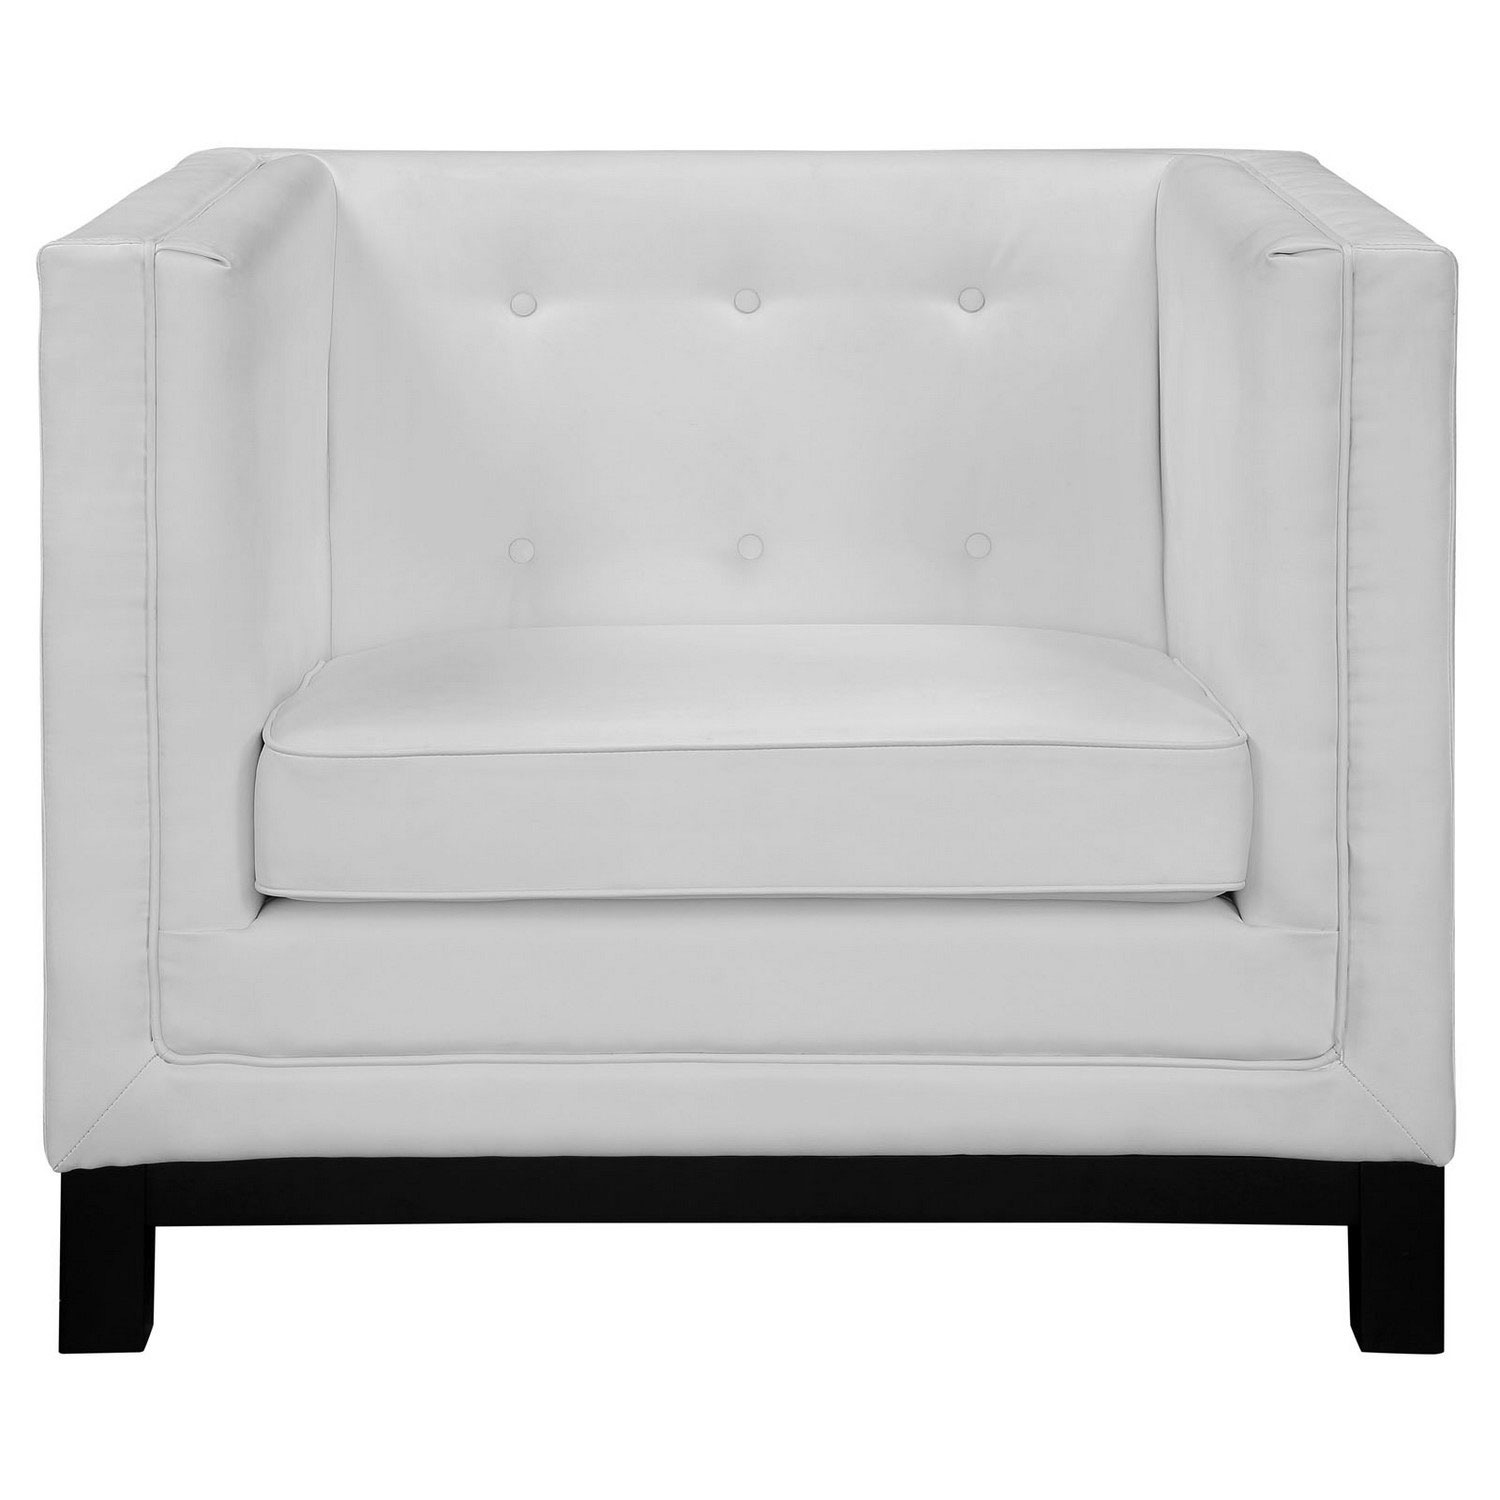 Modway Imperial 2 Piece Living Room Set - White